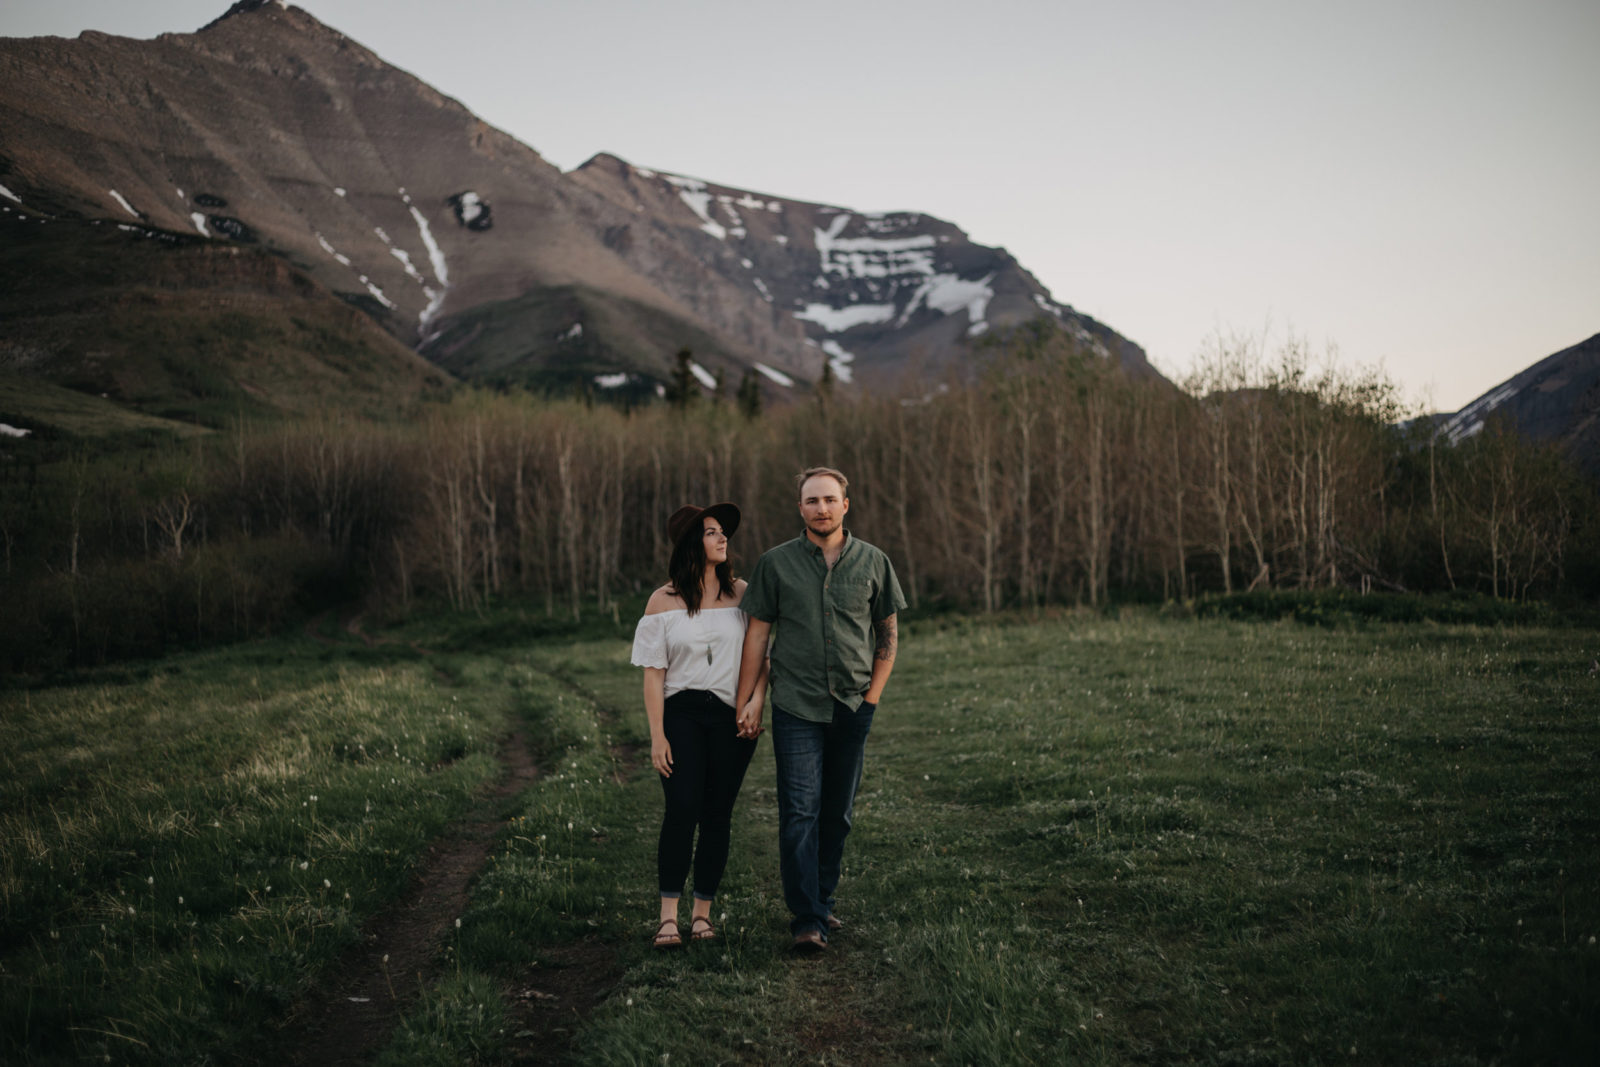 8 Tips for Your Perfect Engagement Session - Tips from Local Calgary & area Wedding Photographers - on the Bronte Bride Blog, choosing your location